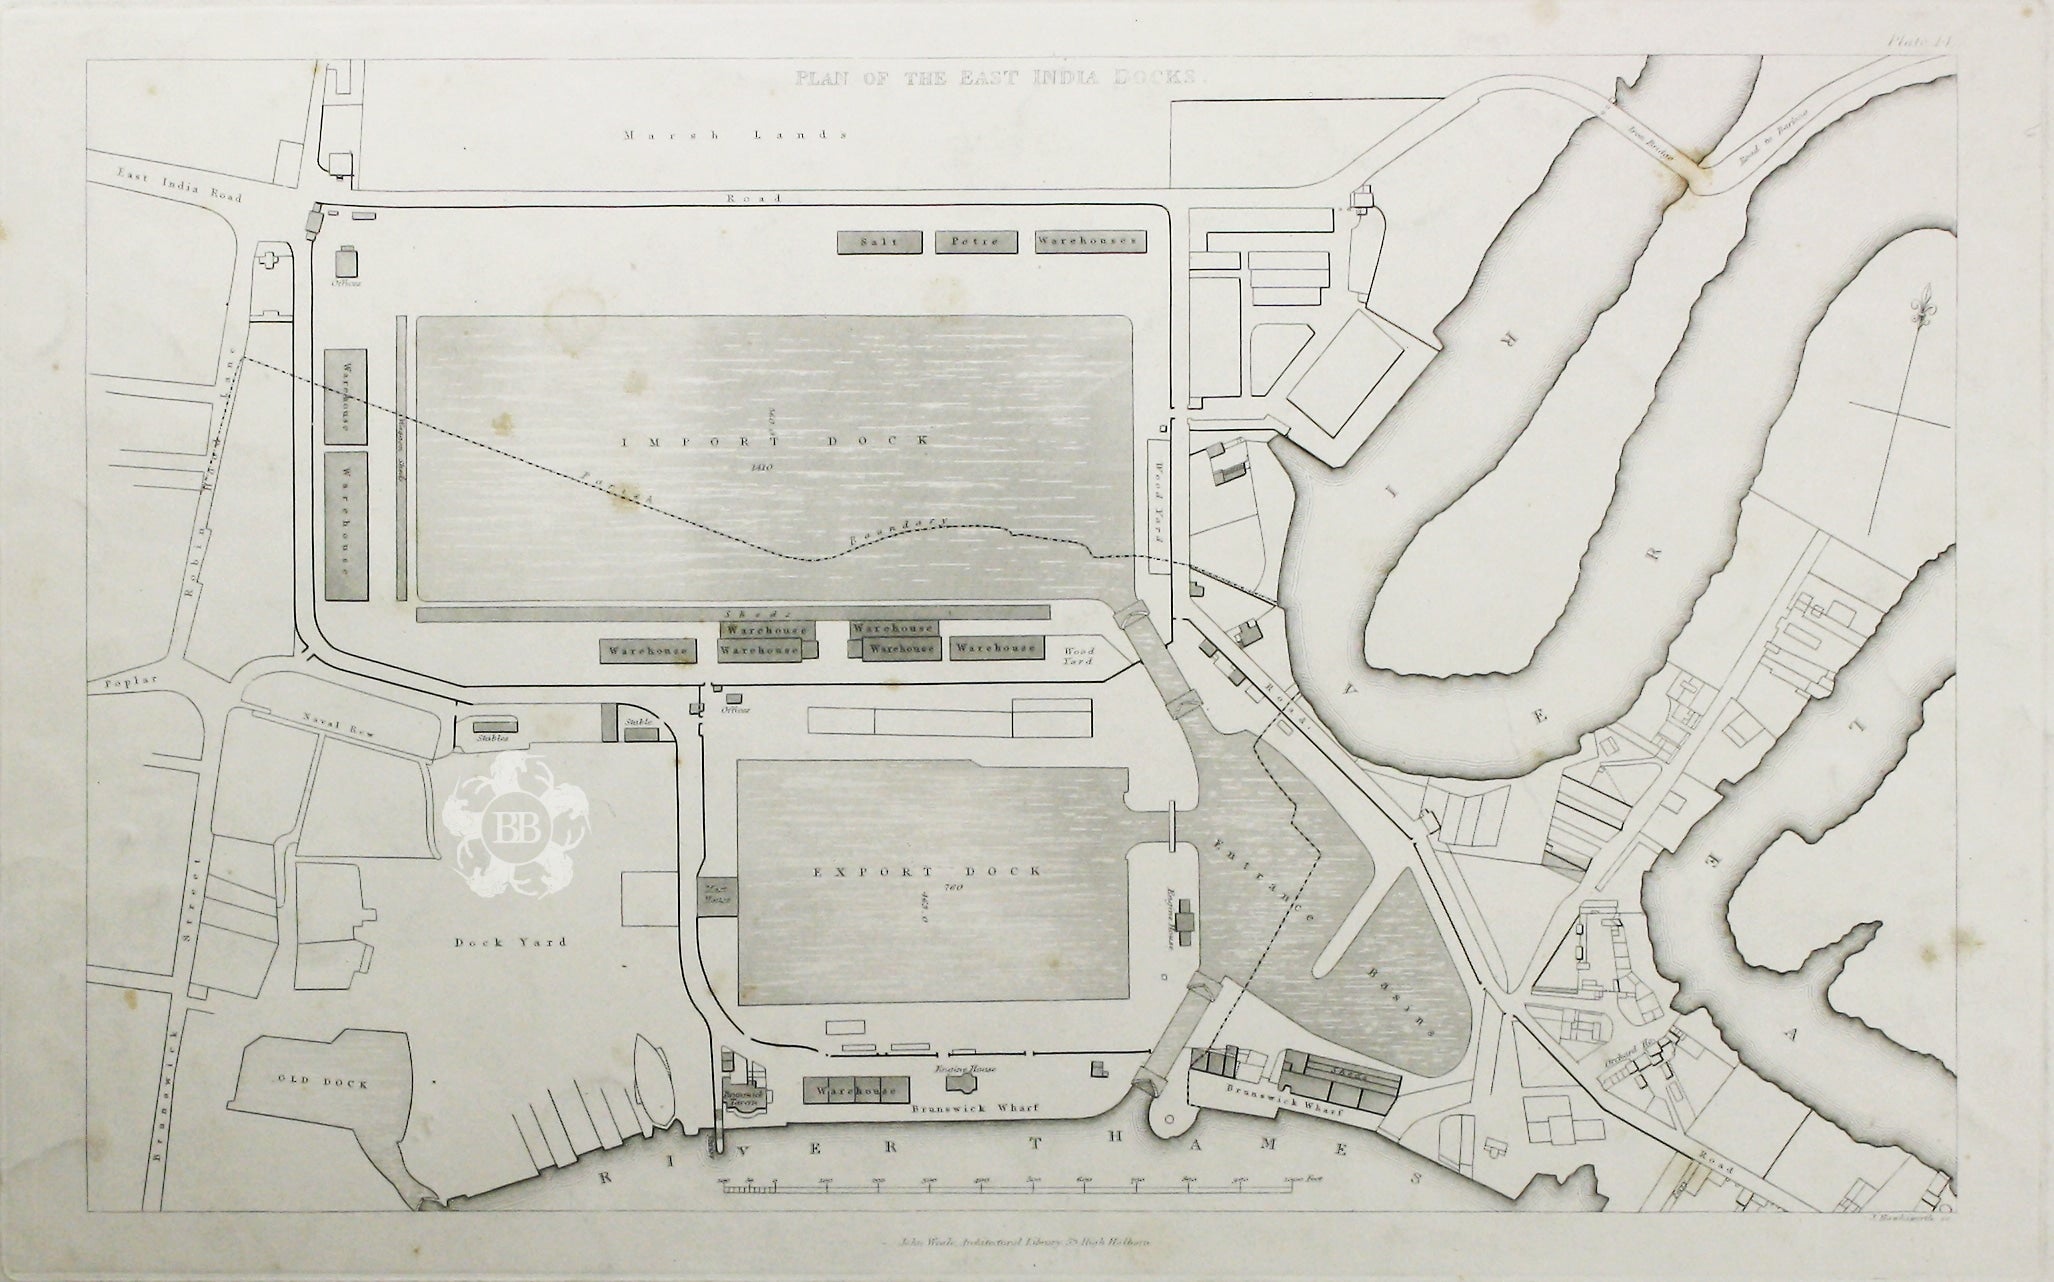 Simm’s Plan of the East India Docks